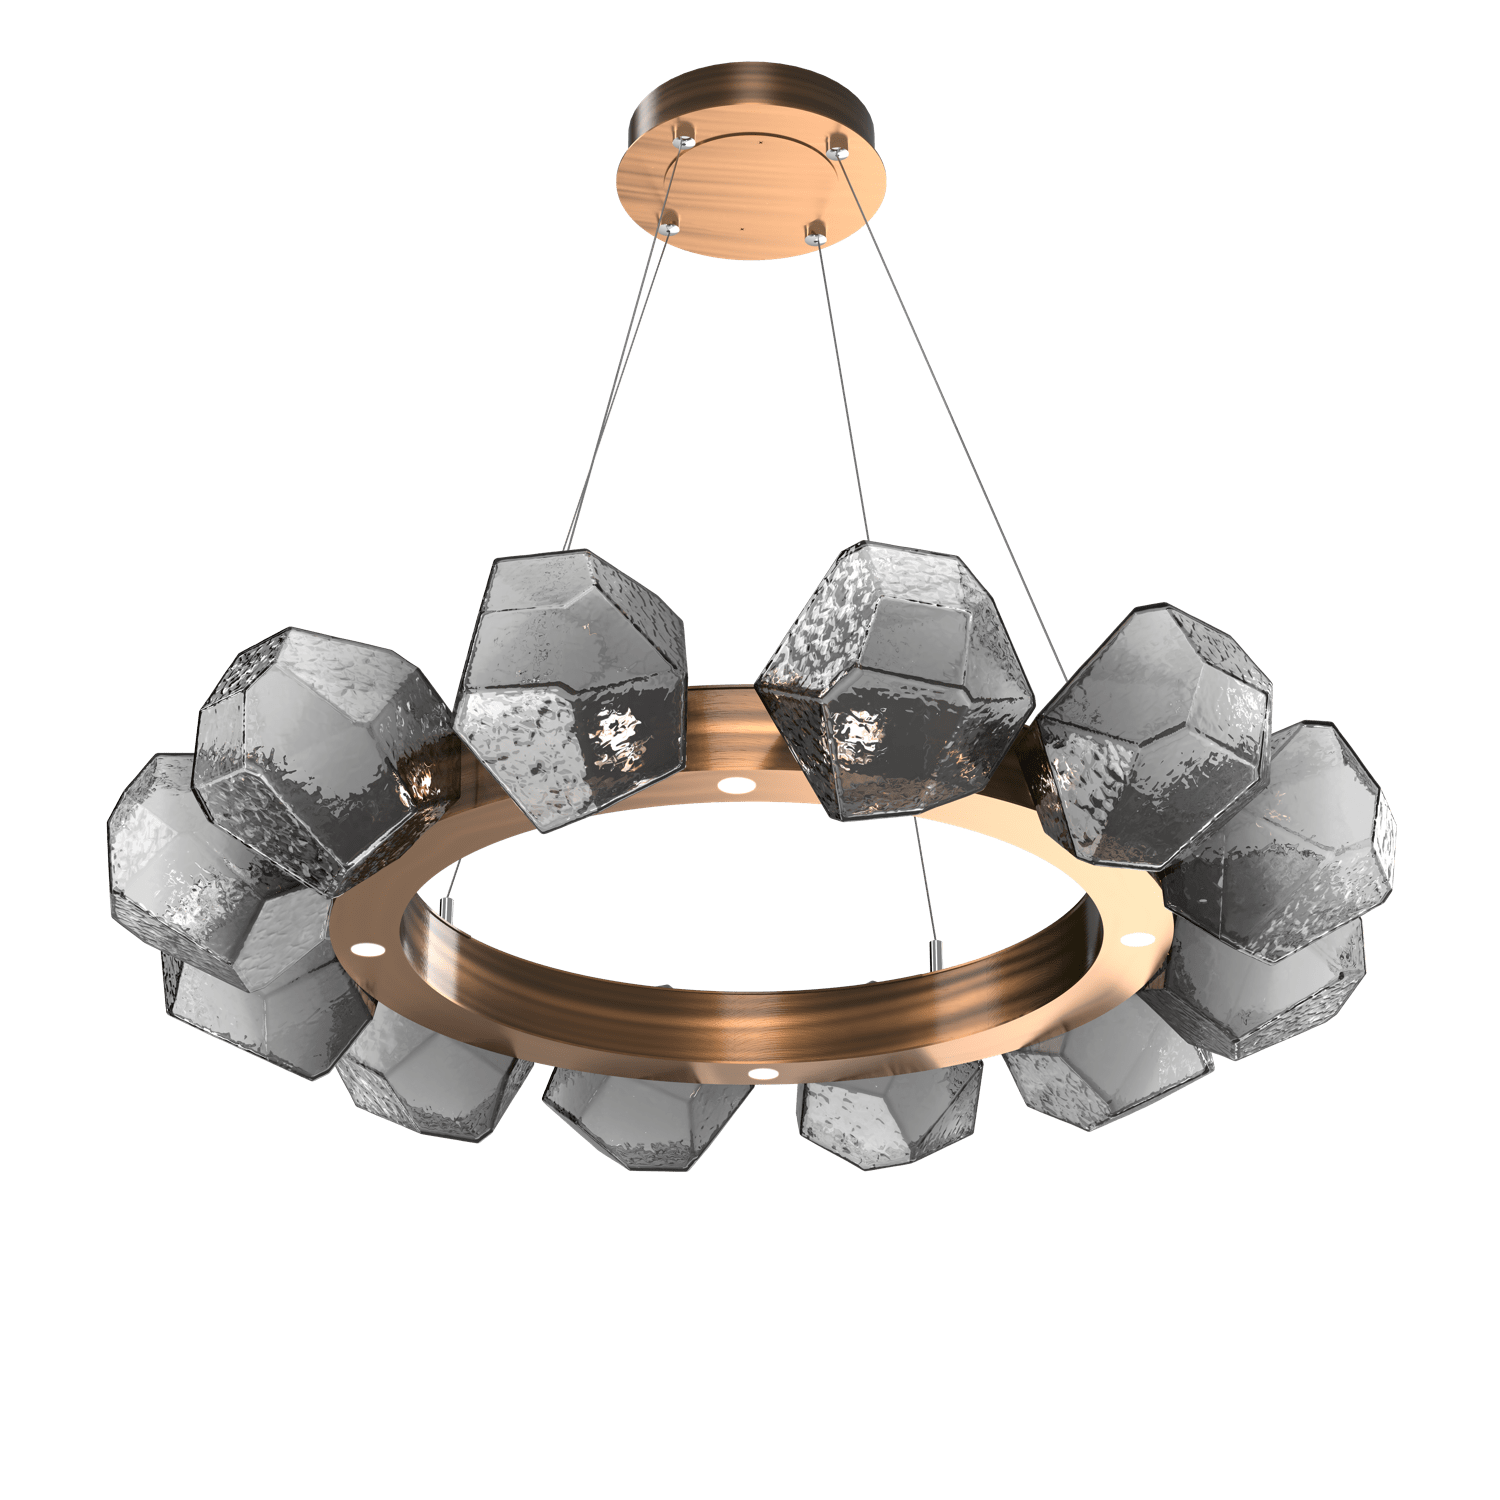 CHB0039-36-RB-S-Hammerton-Studio-Gem-36-inch-radial-ring-chandelier-with-oil-rubbed-bronze-finish-and-smoke-blown-glass-shades-and-LED-lamping